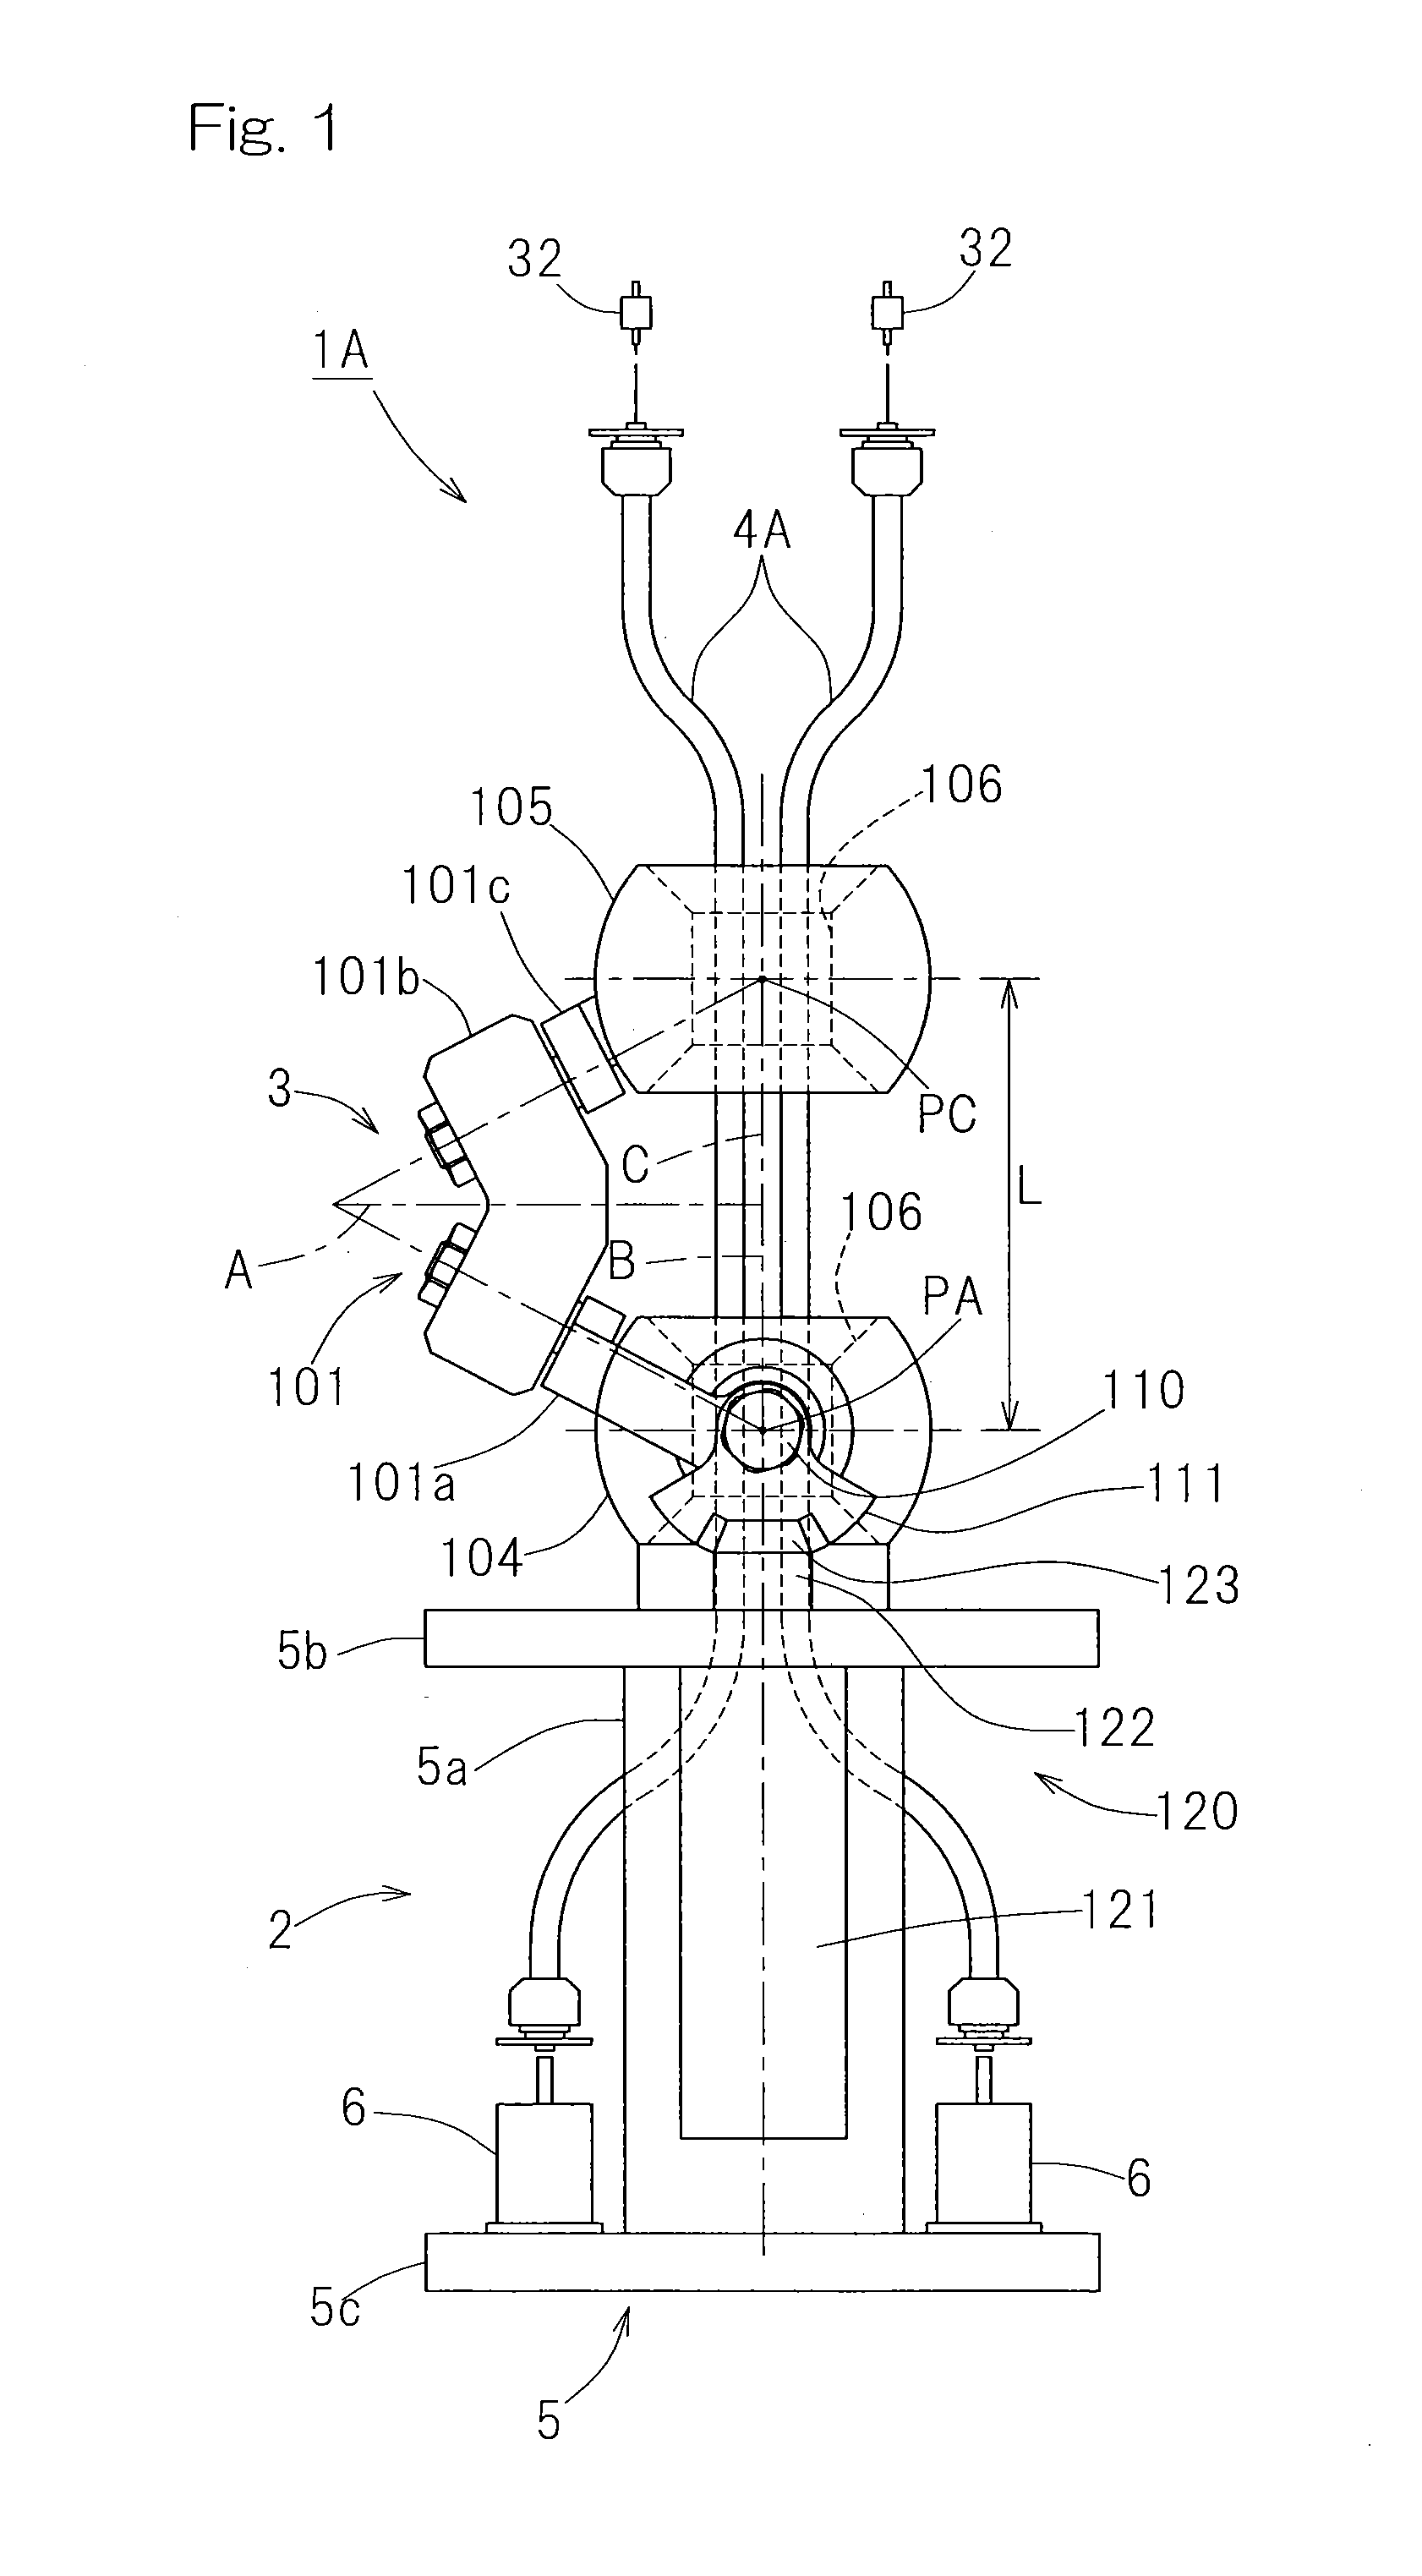 Link actuation device